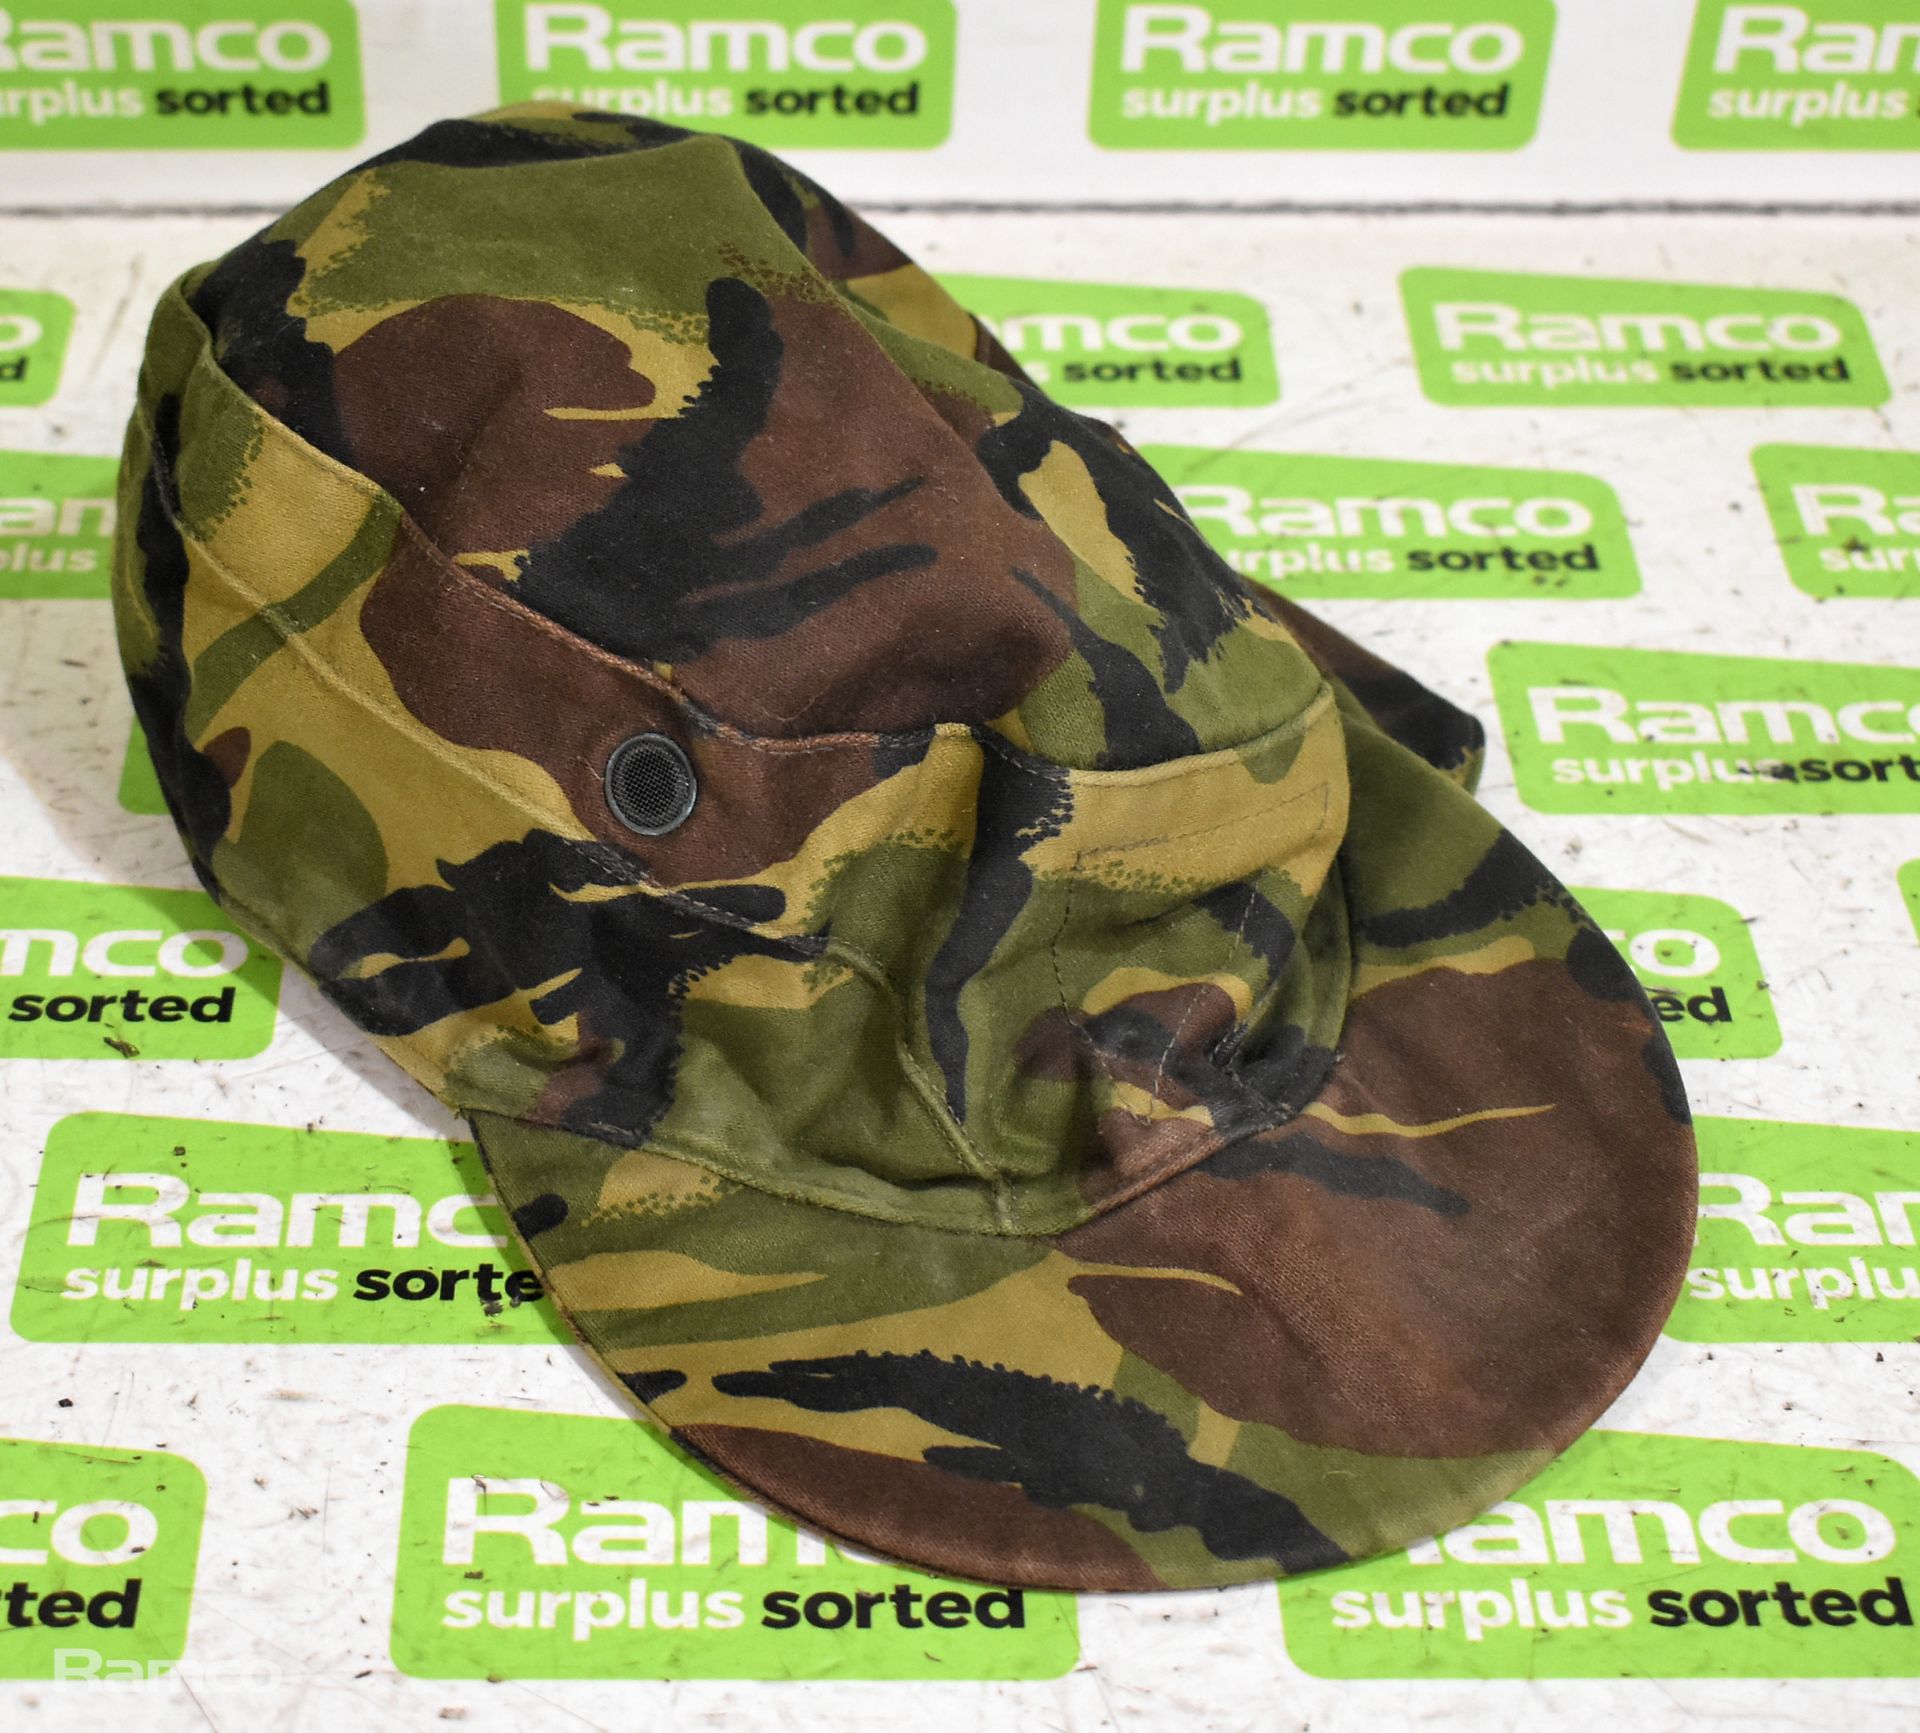 British Army DPM helmet covers, DPM combat hats, DPM cold weather caps, Mixed pouches, DPM hats